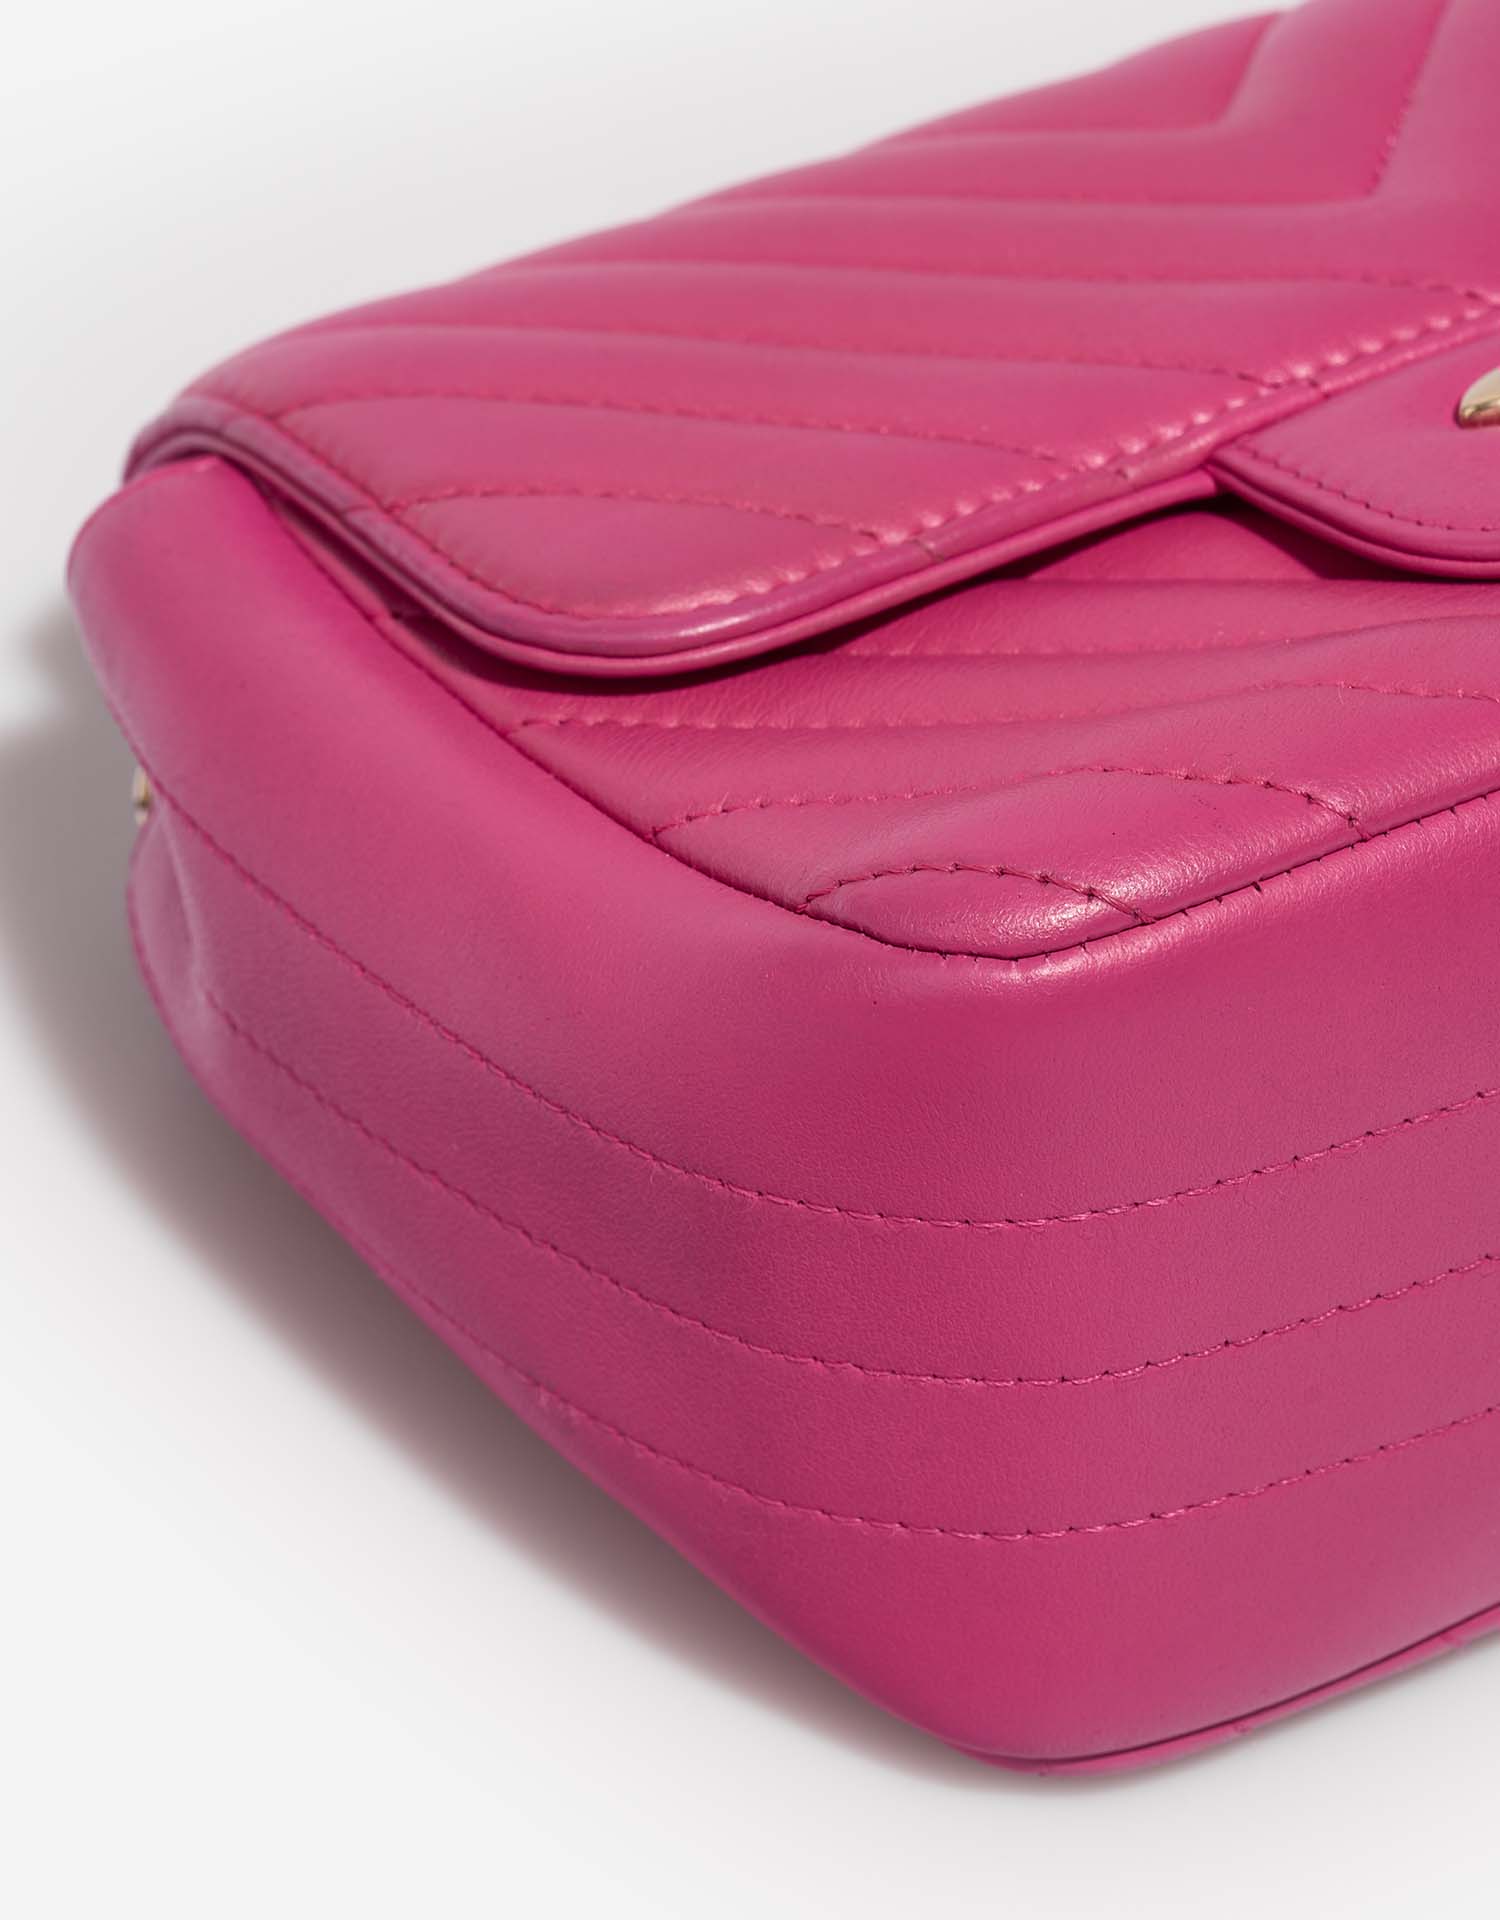 Chanel Timeless MiniRectangular Pink signs of wear| Sell your designer bag on Saclab.com